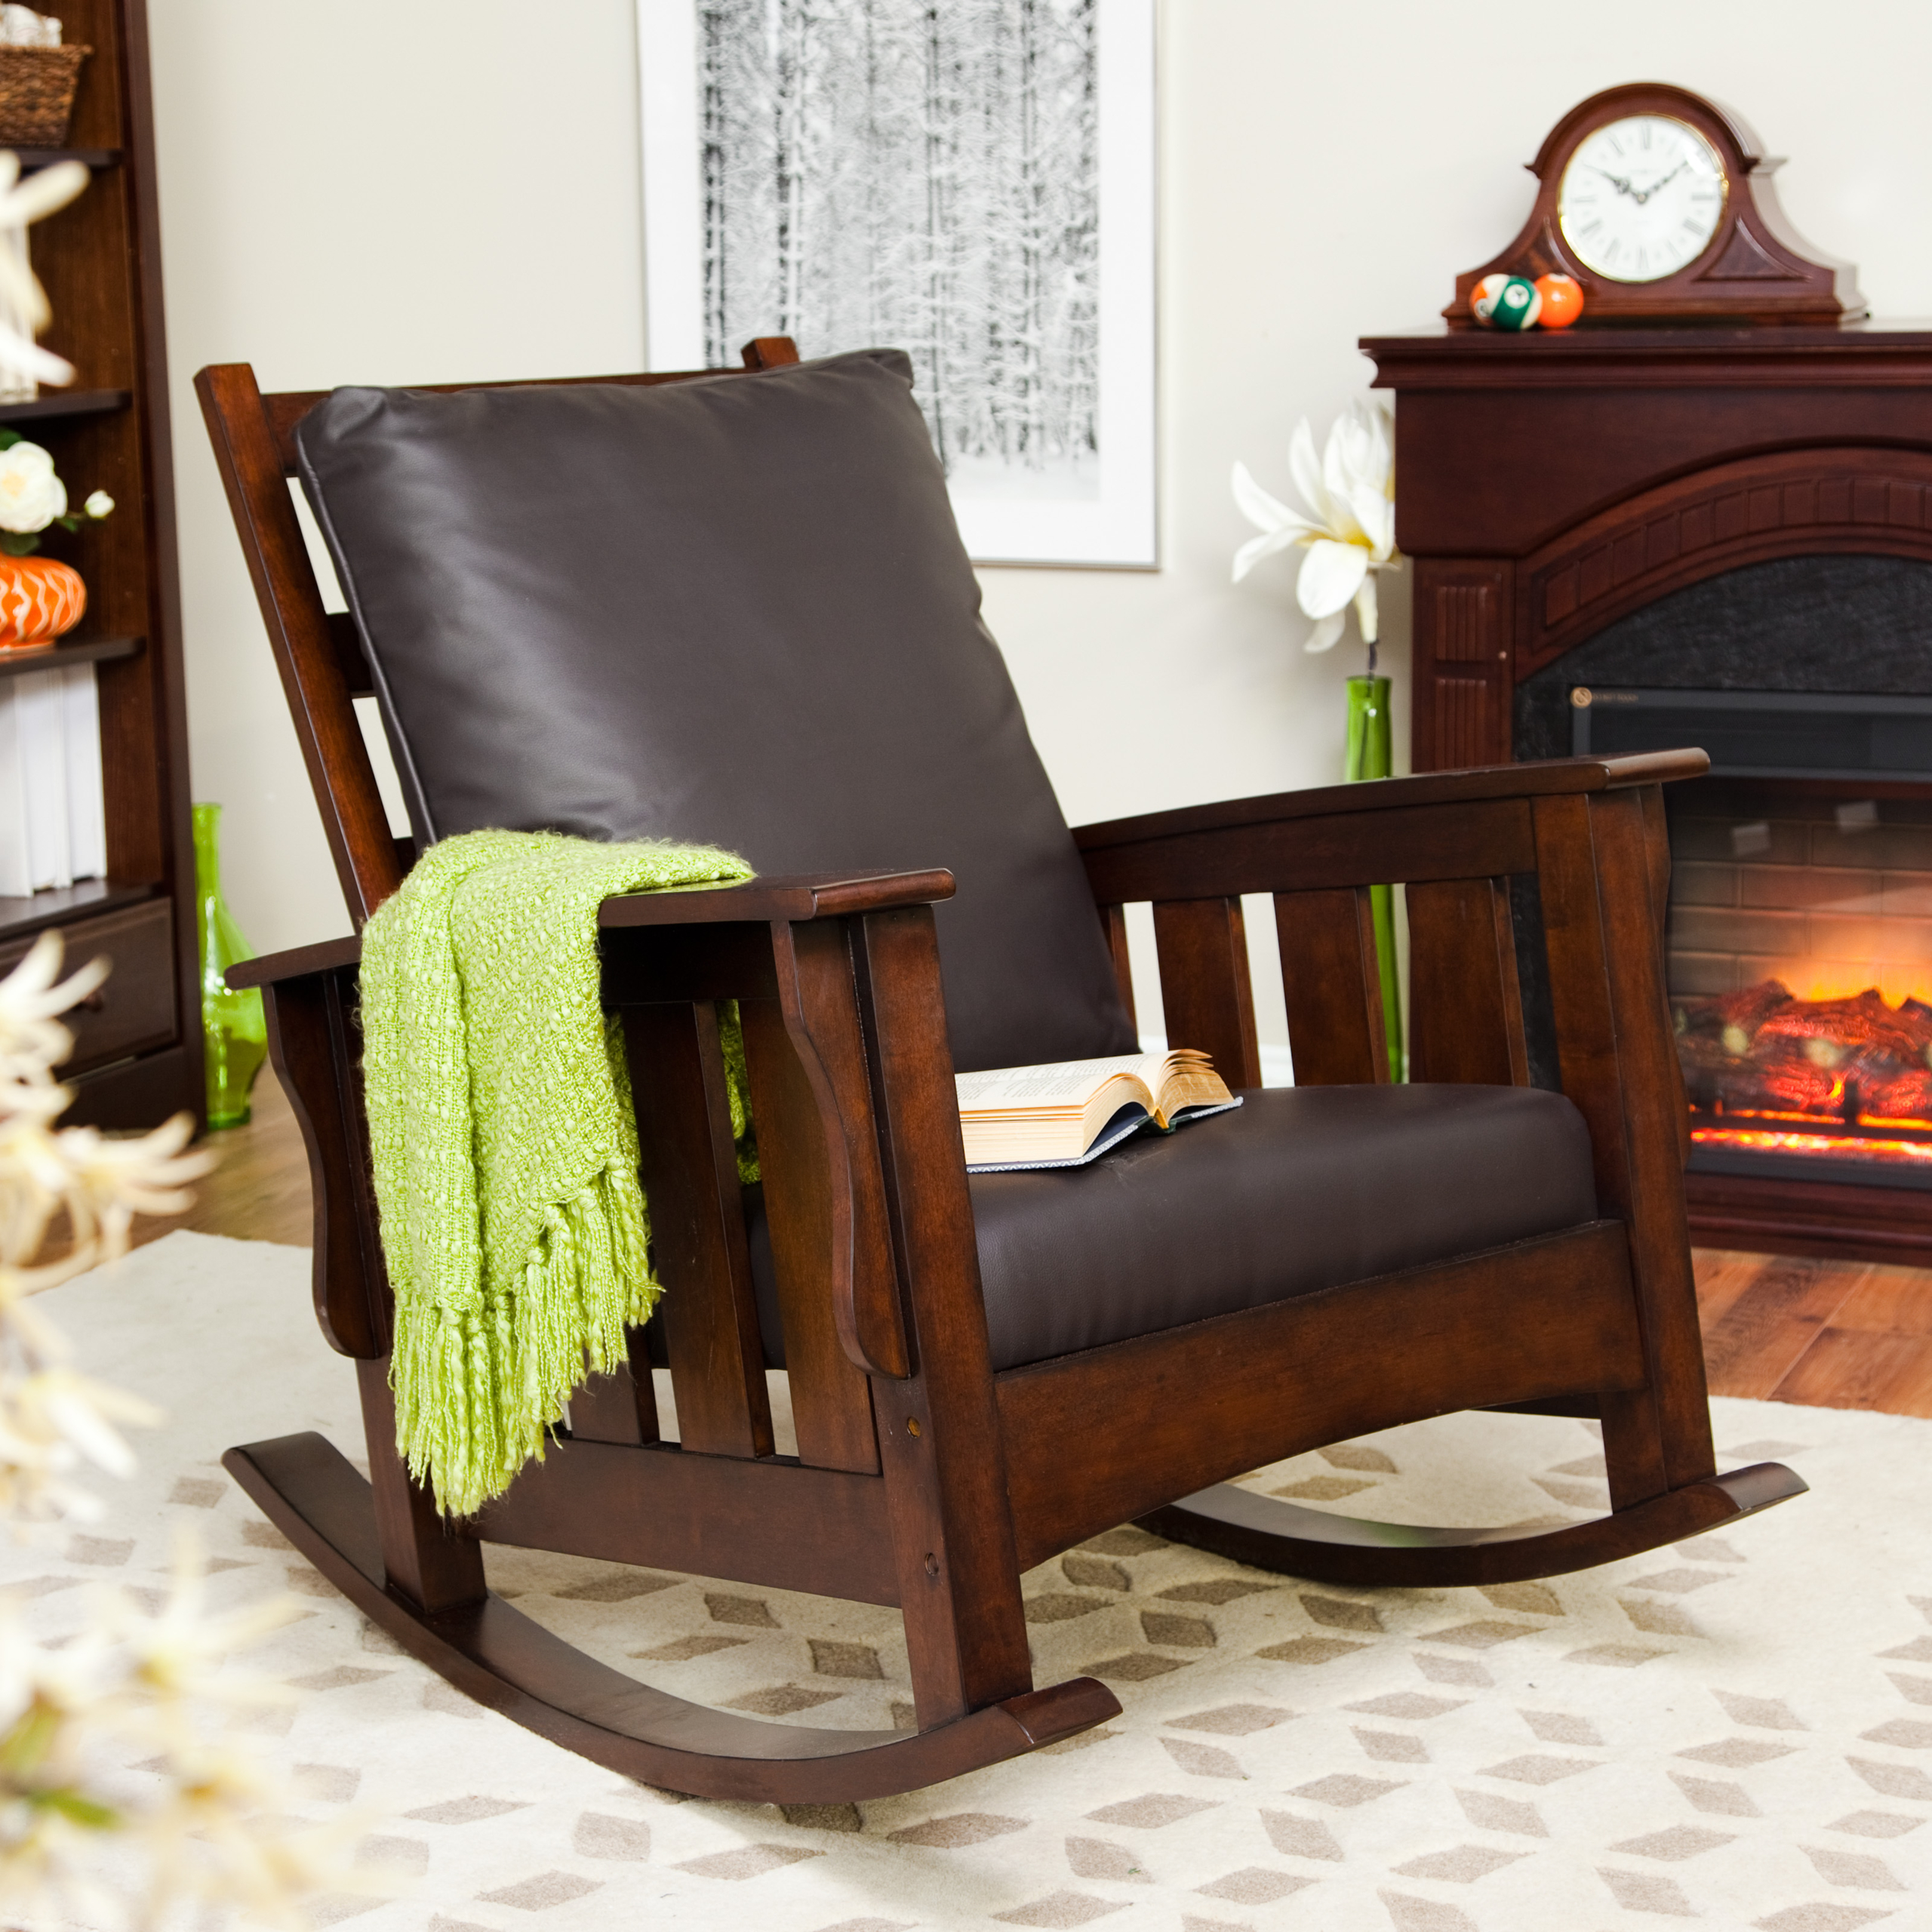 Leather rocking chairs